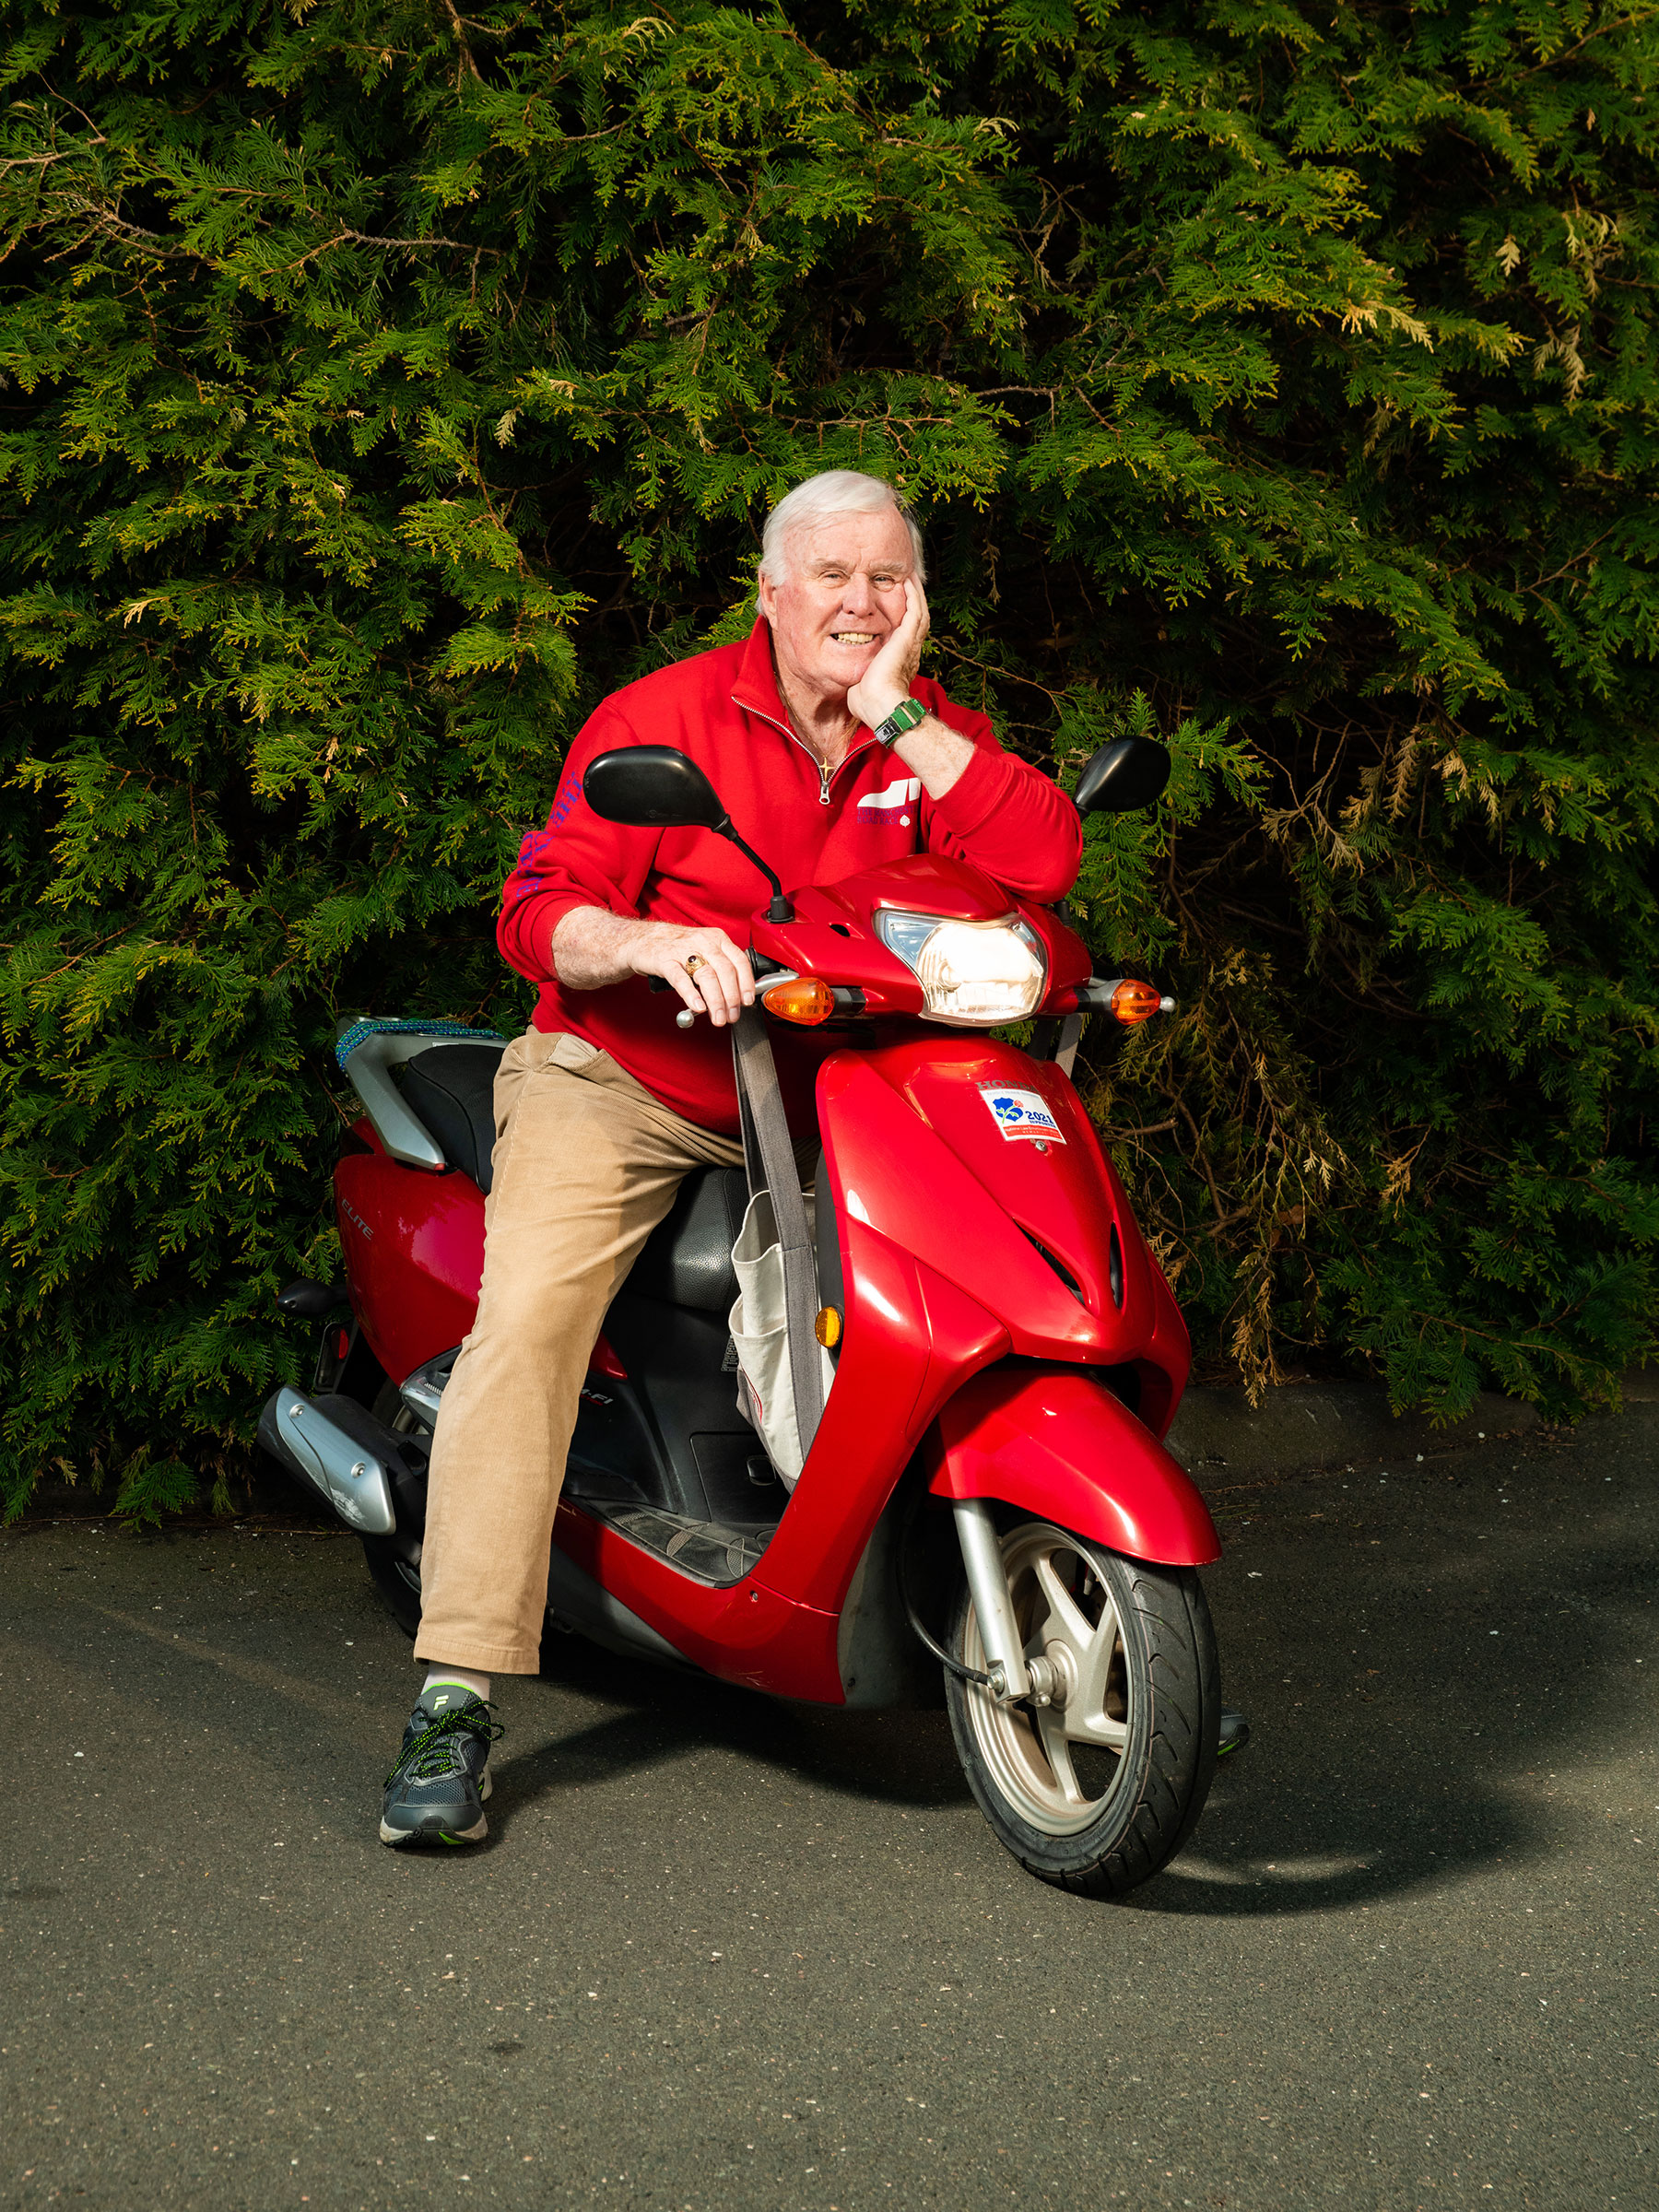 Jim Byrne poses for a portrait with his scooter outside of his home in Connecticut. (Evan Angelastro for TIME)